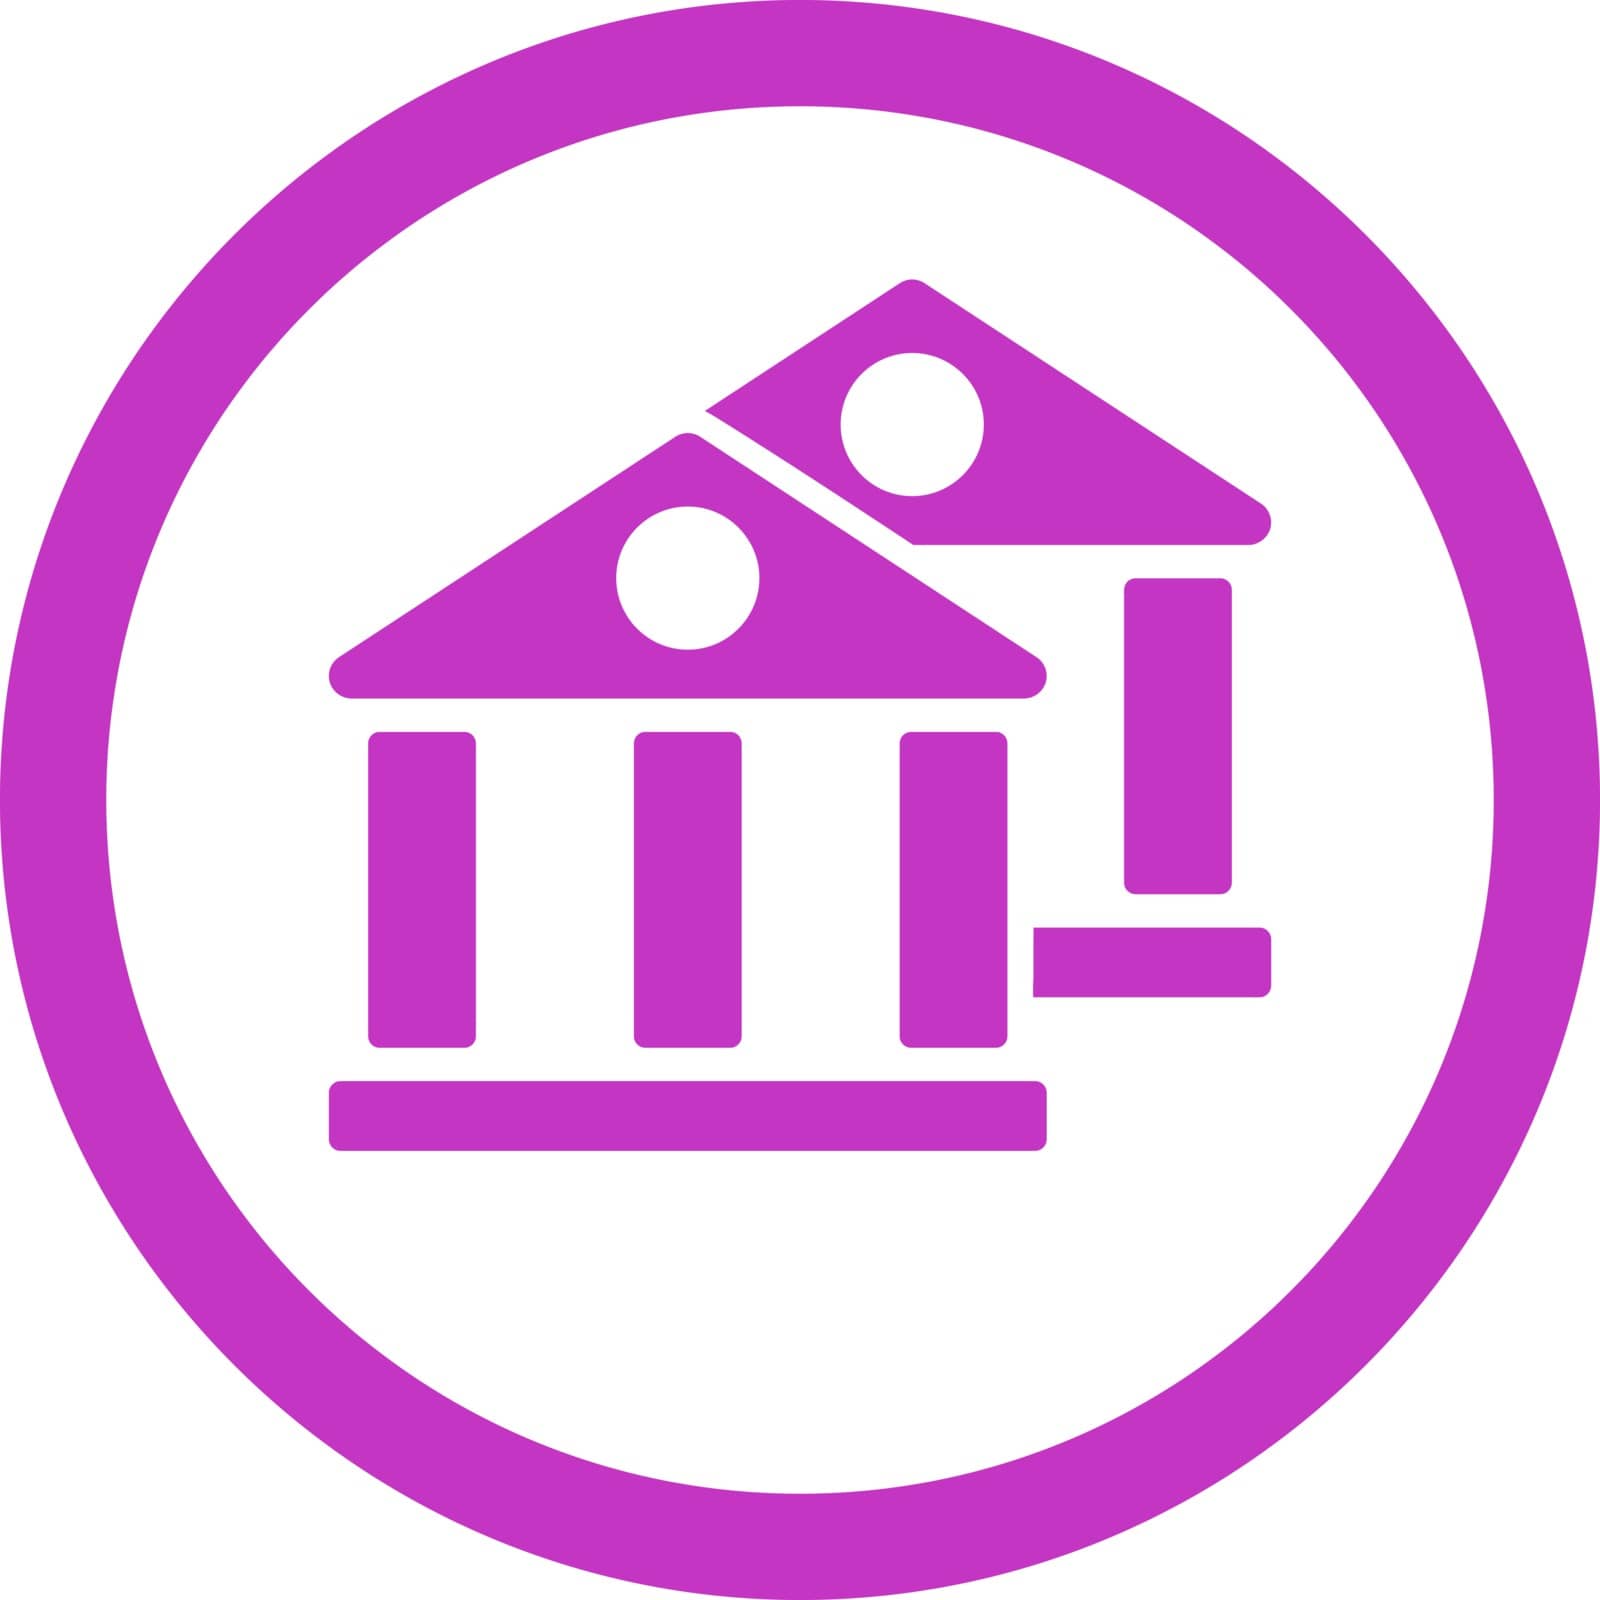 Banks vector icon. This flat rounded symbol uses violet color and isolated on a white background.